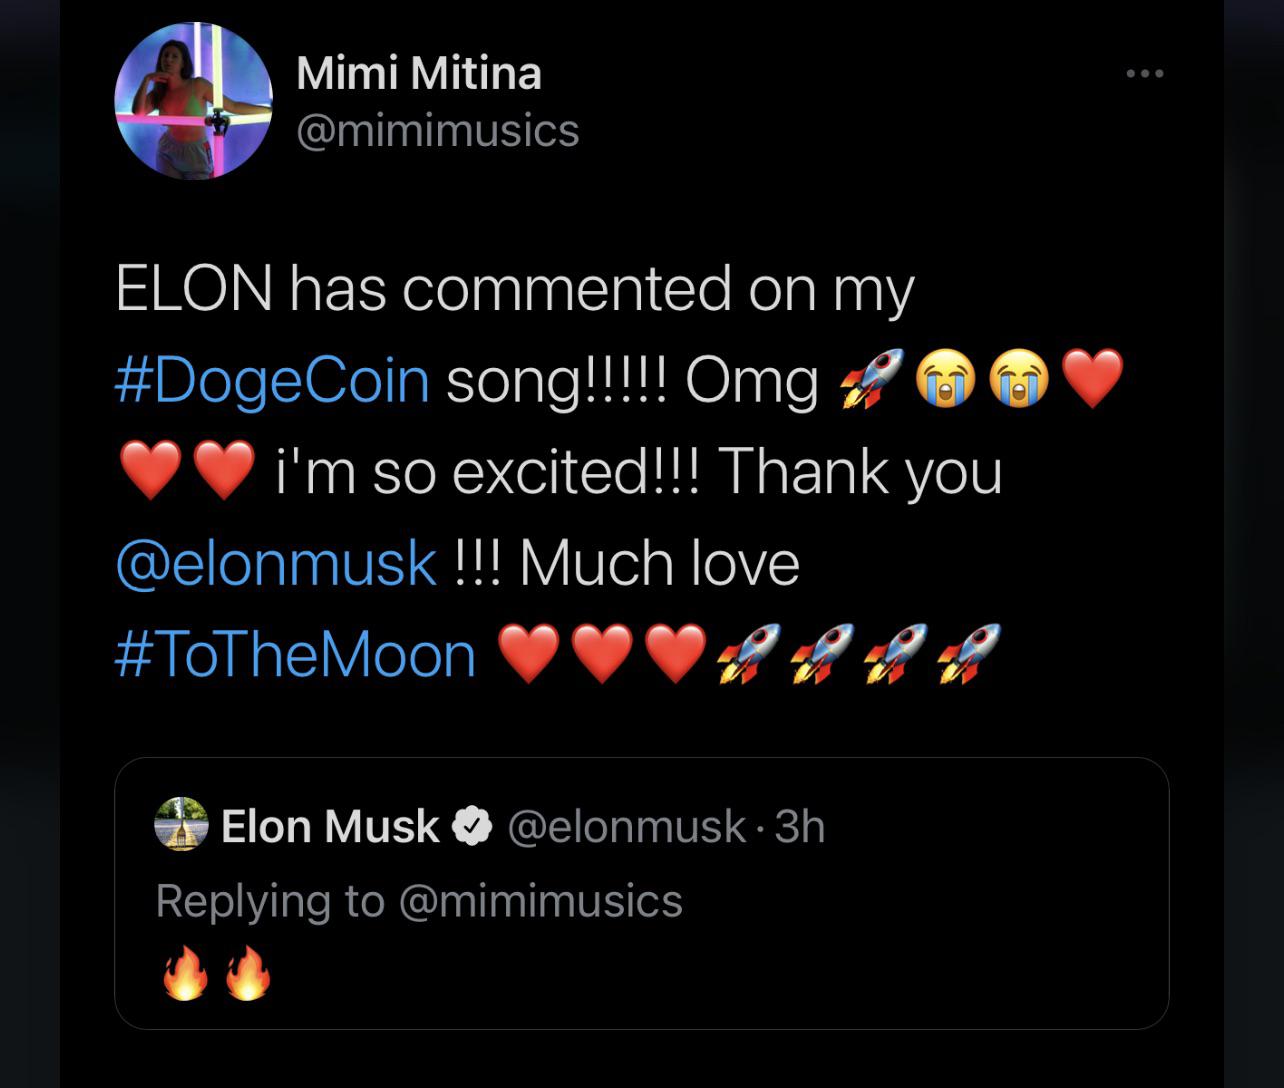 screenshot - Mimi Mitina Elon has commented on my song!!!!! Omg ? i'm so excited!!! Thank you !!! Much love Elon Musk .3h